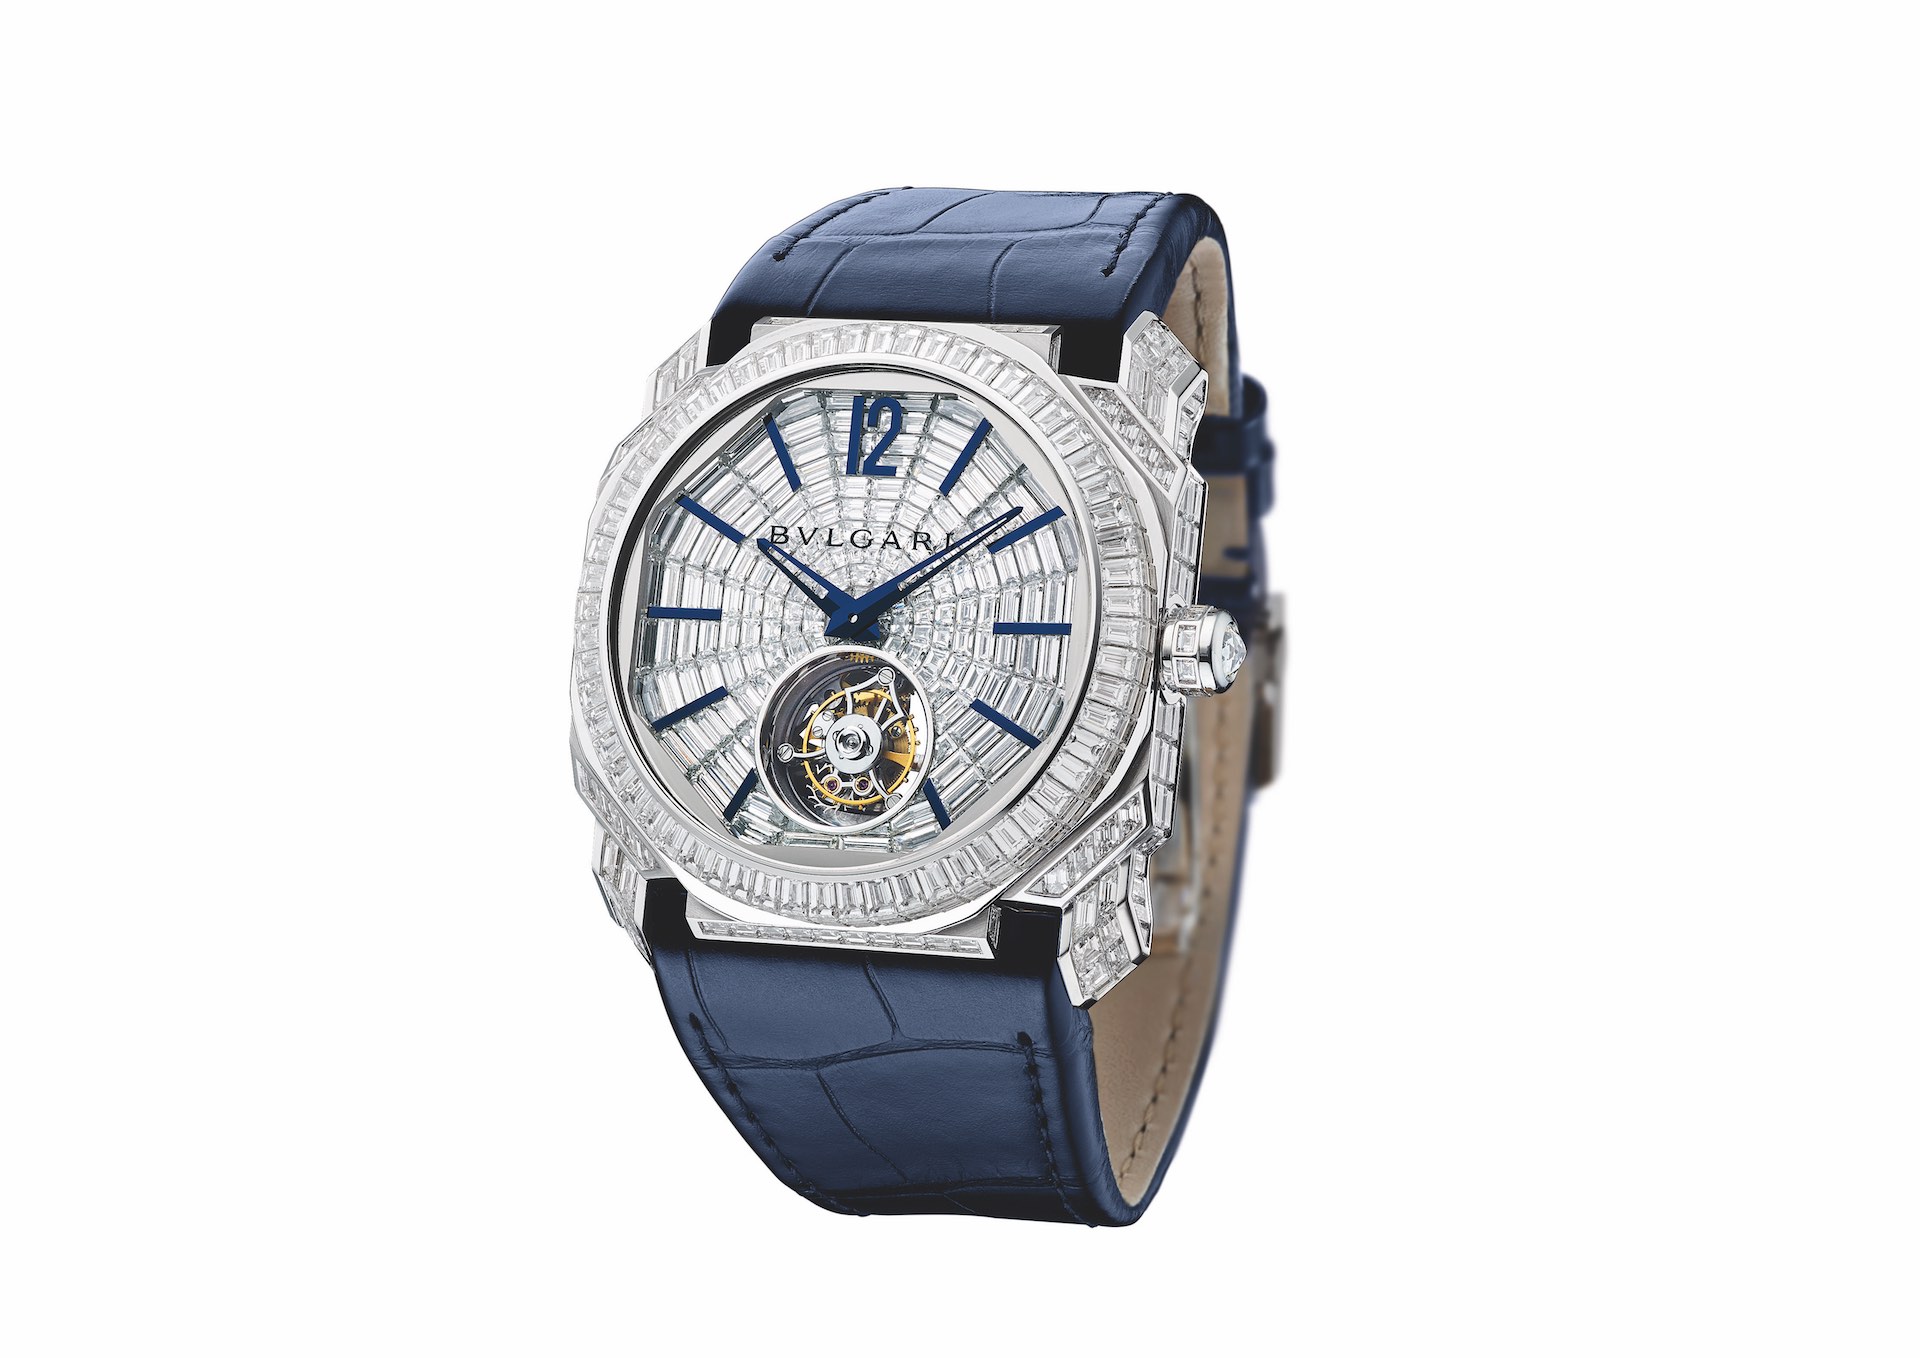 Bulgari Shanghai Collection Of High Jewelry Watches Ablogtowatch